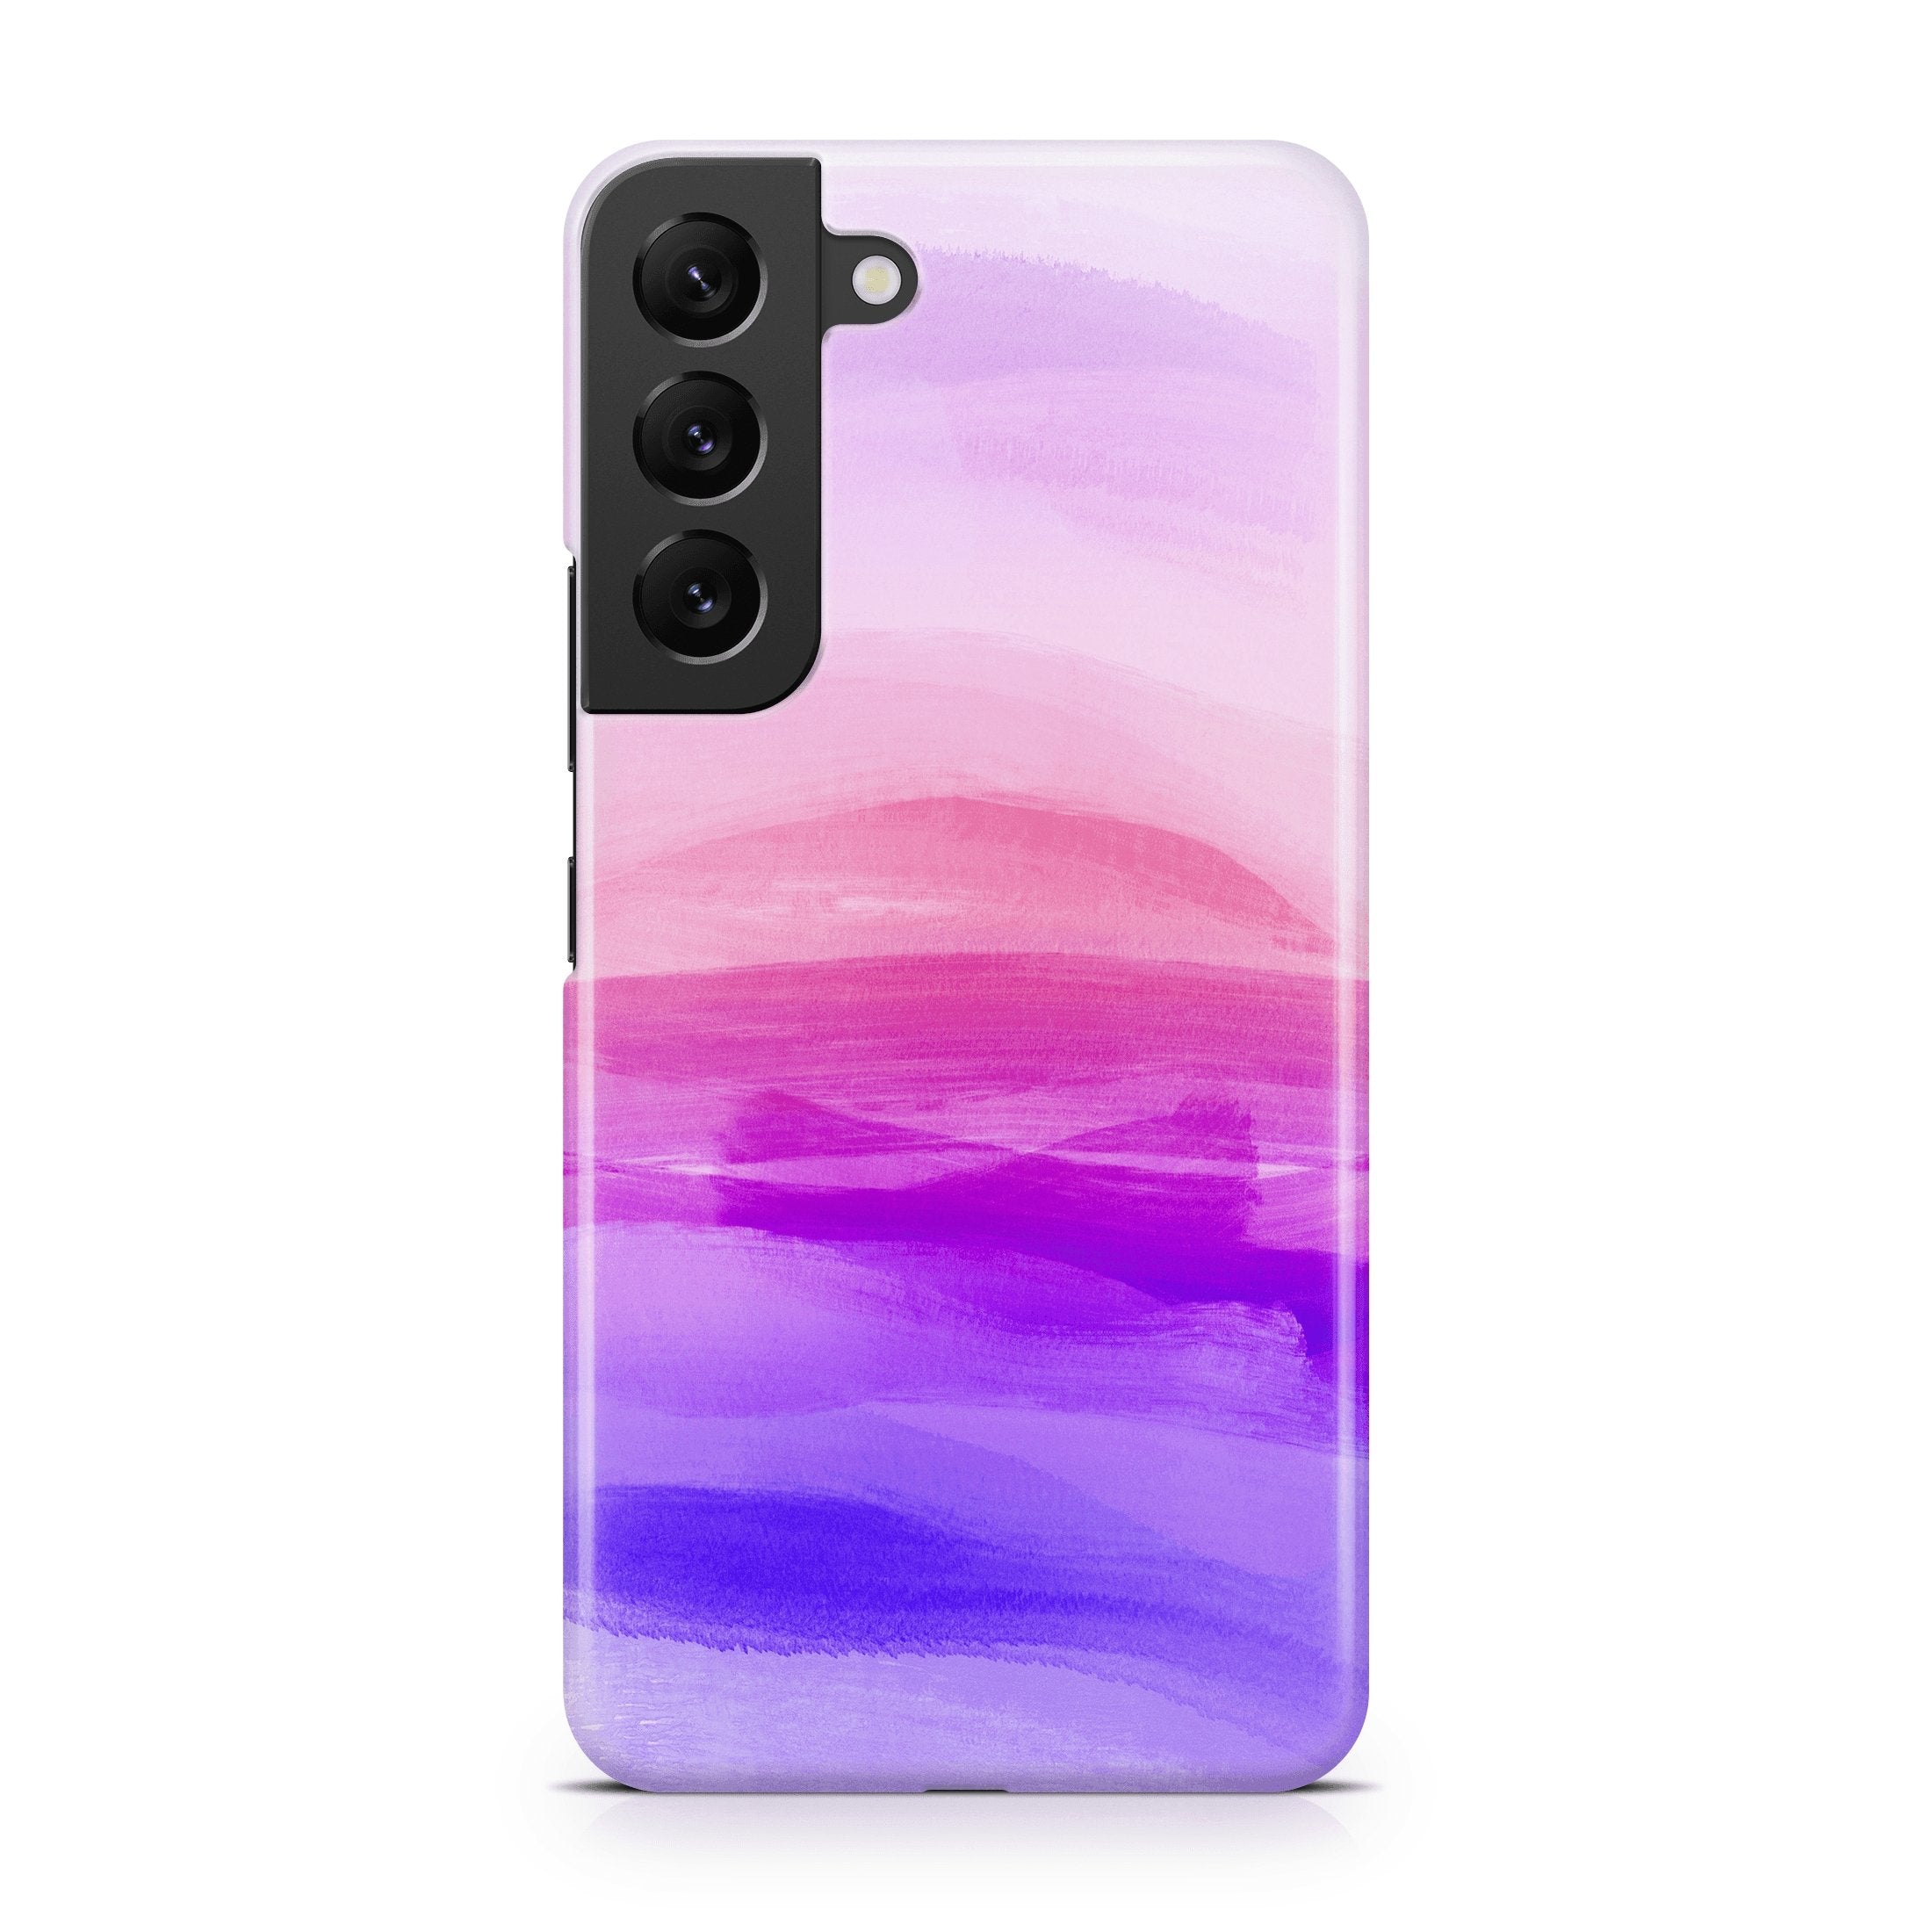 Sunrise Pink Ombre - Samsung phone case designs by CaseSwagger